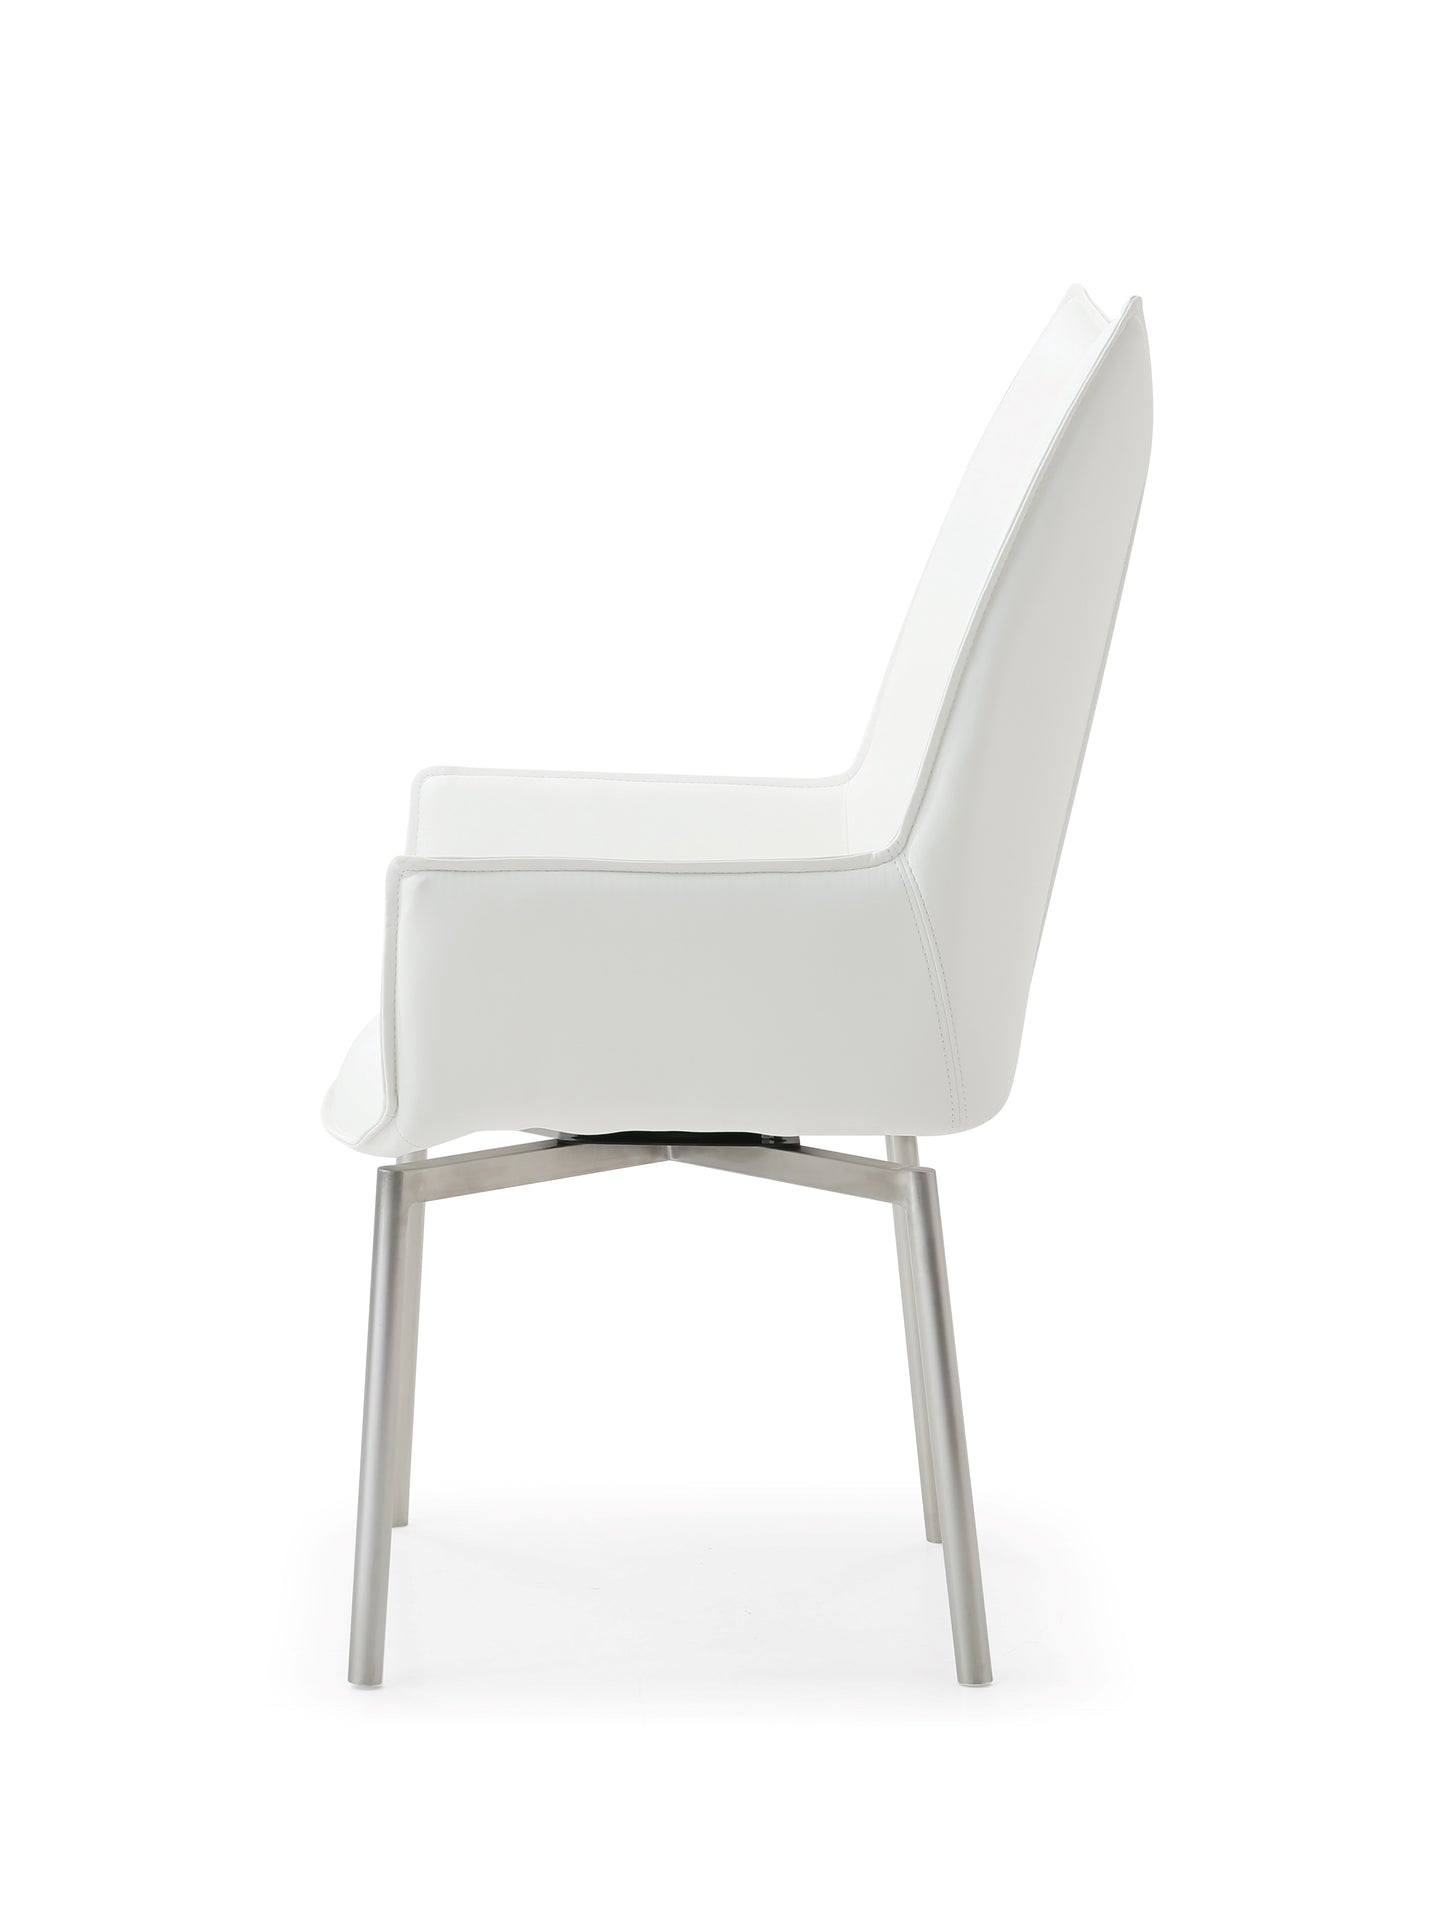 9087 Table White With 4 Swivel White Chairs